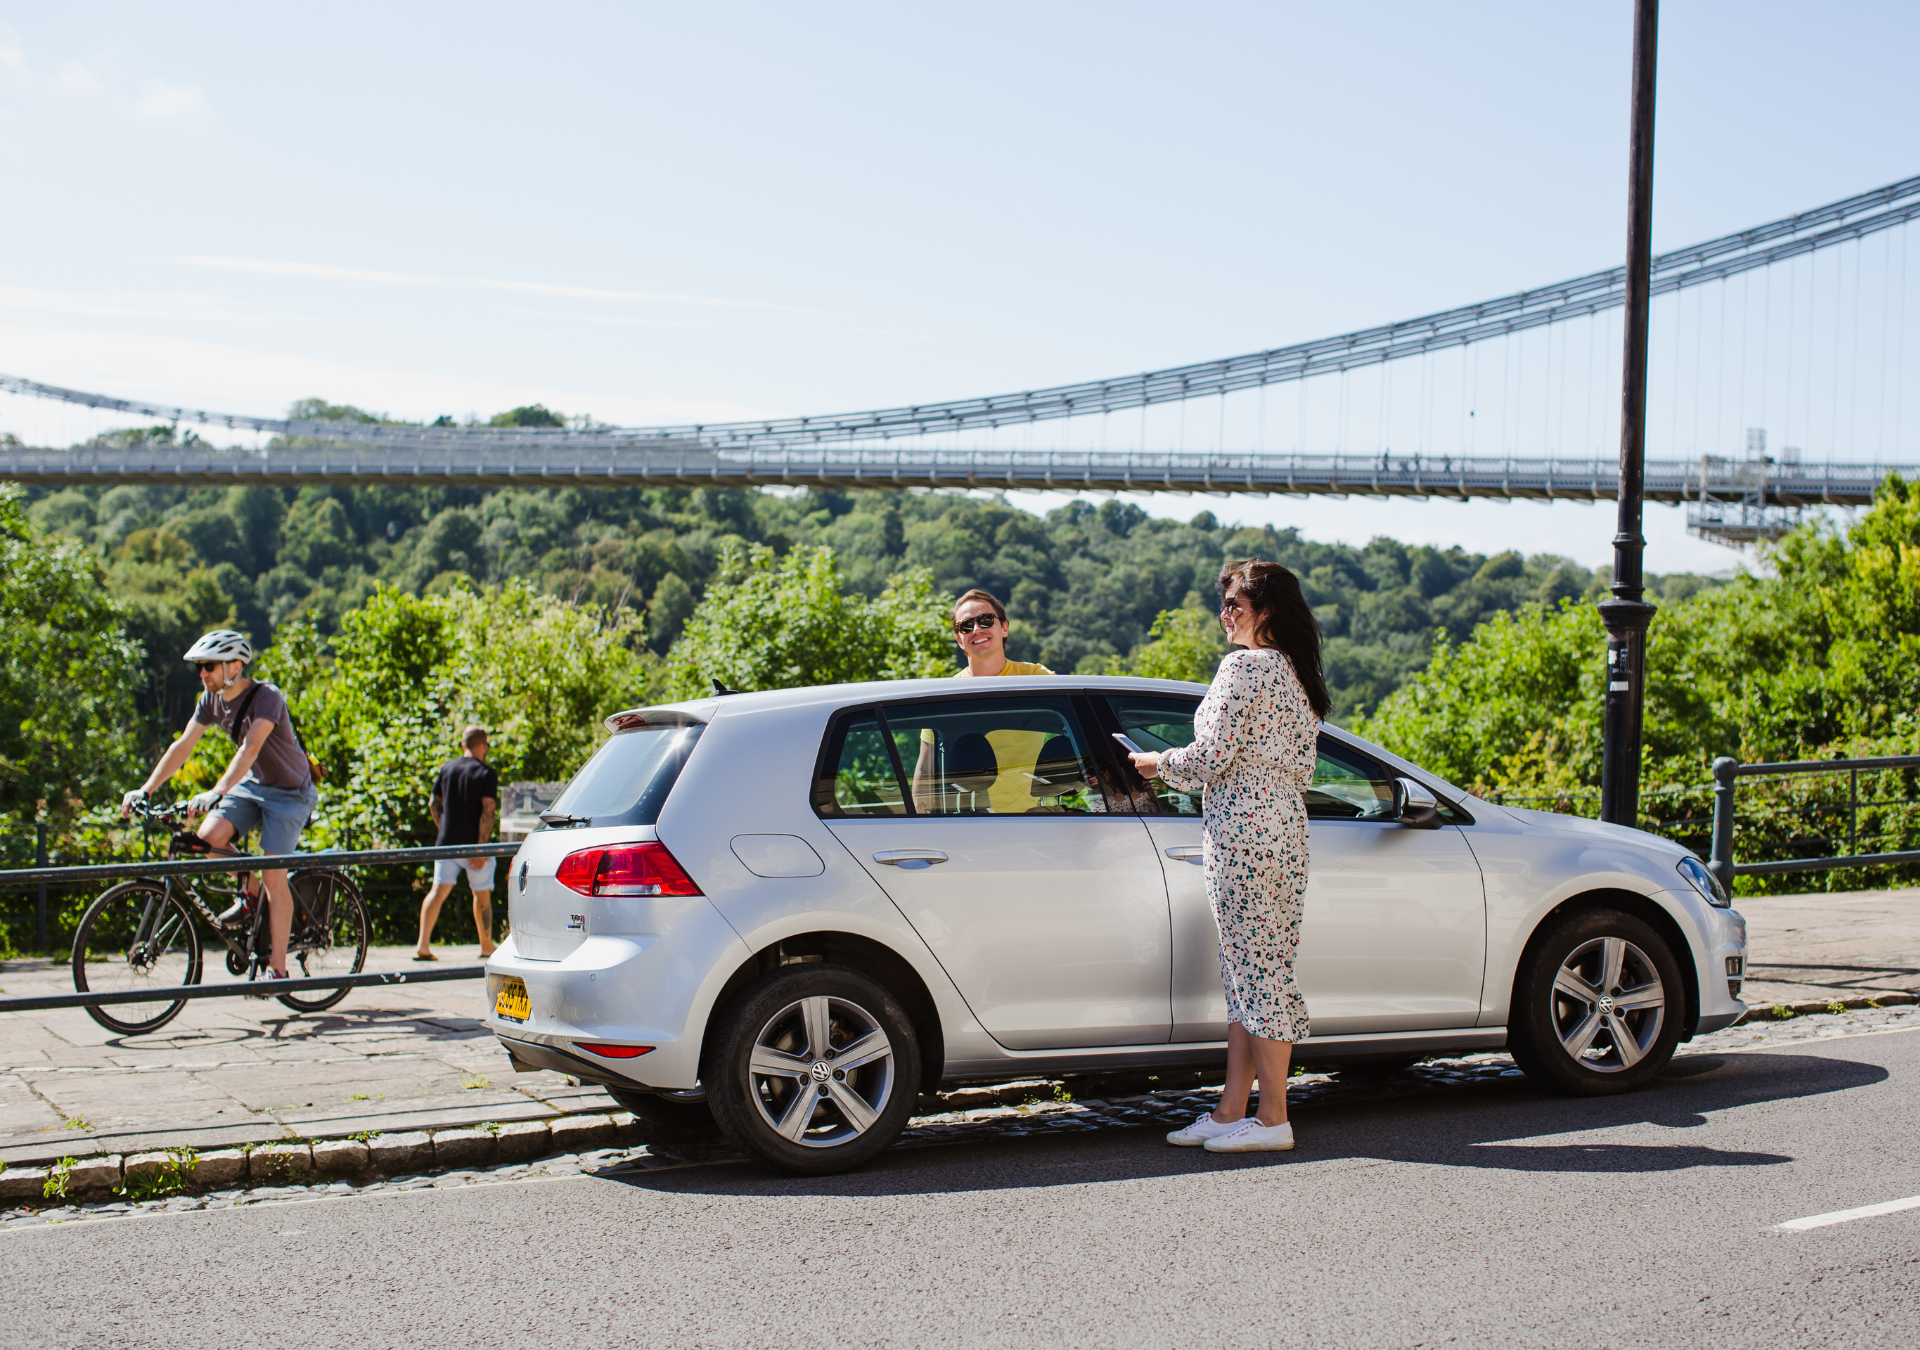 Discover one of the UK's fastest growing car sharing communities - Karshare